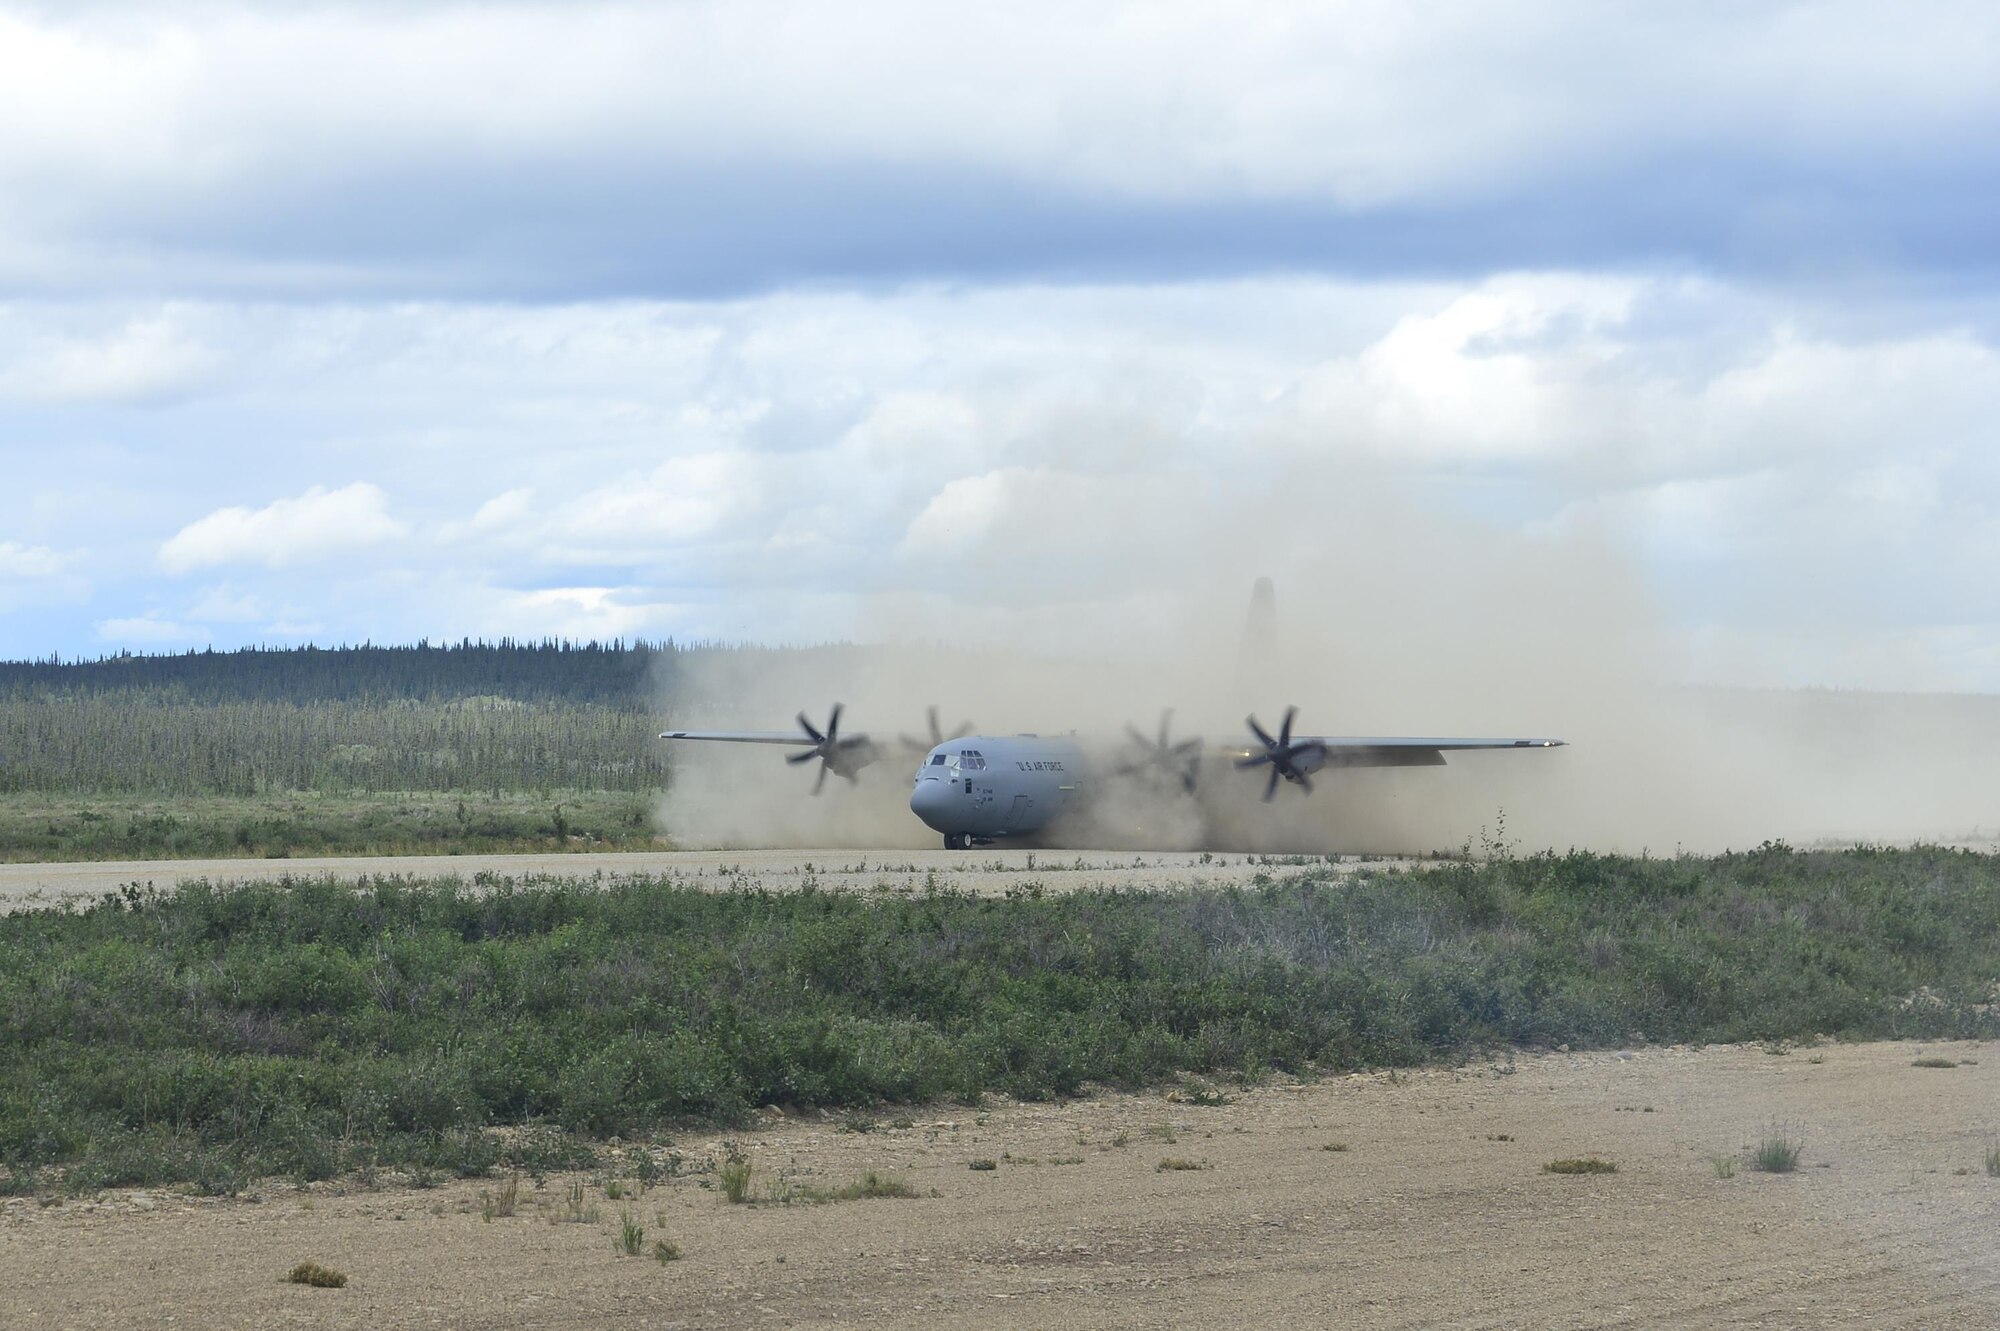 A C-130J from the 41st Airlift Squadron lands on a dirt landing strip in Alaska to simulate conditions found in various deployed locations July 20, 2016. Airmen from the 41st AS contributed to Exercise Arctic Anvil, a combined, joint and coalition training event. (U.S. Air Force photo by Senior Airman Kaylee Clark)